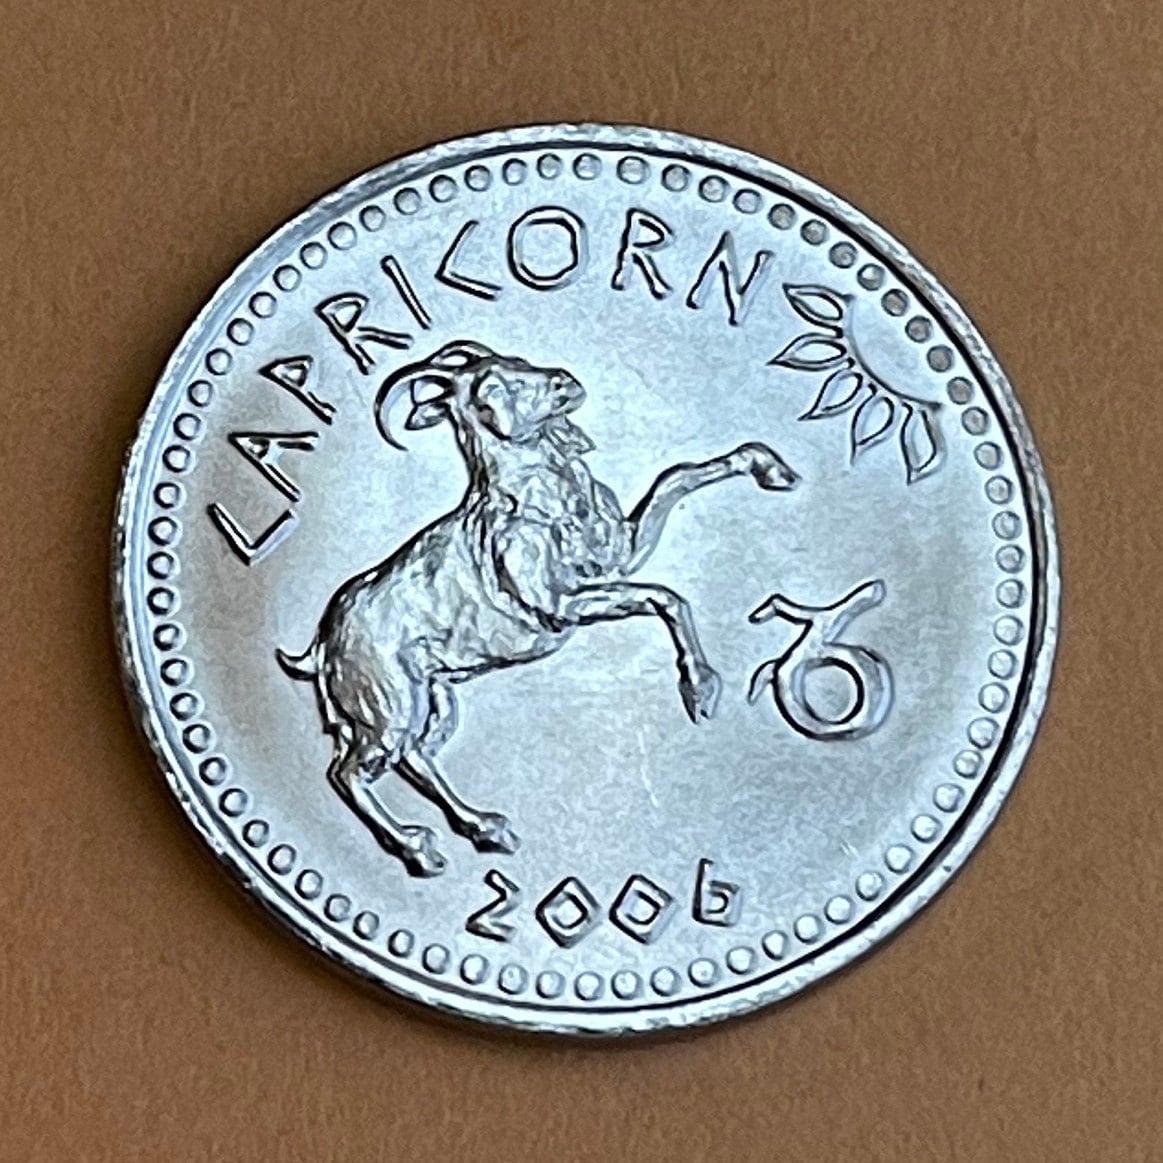 Capricorn the Goat 10 Shillings Somaliland Authentic Coin Money for Jewelry and Craft Making (Zodiac Series) (Astrology) Sea Goat (Enki) Ea